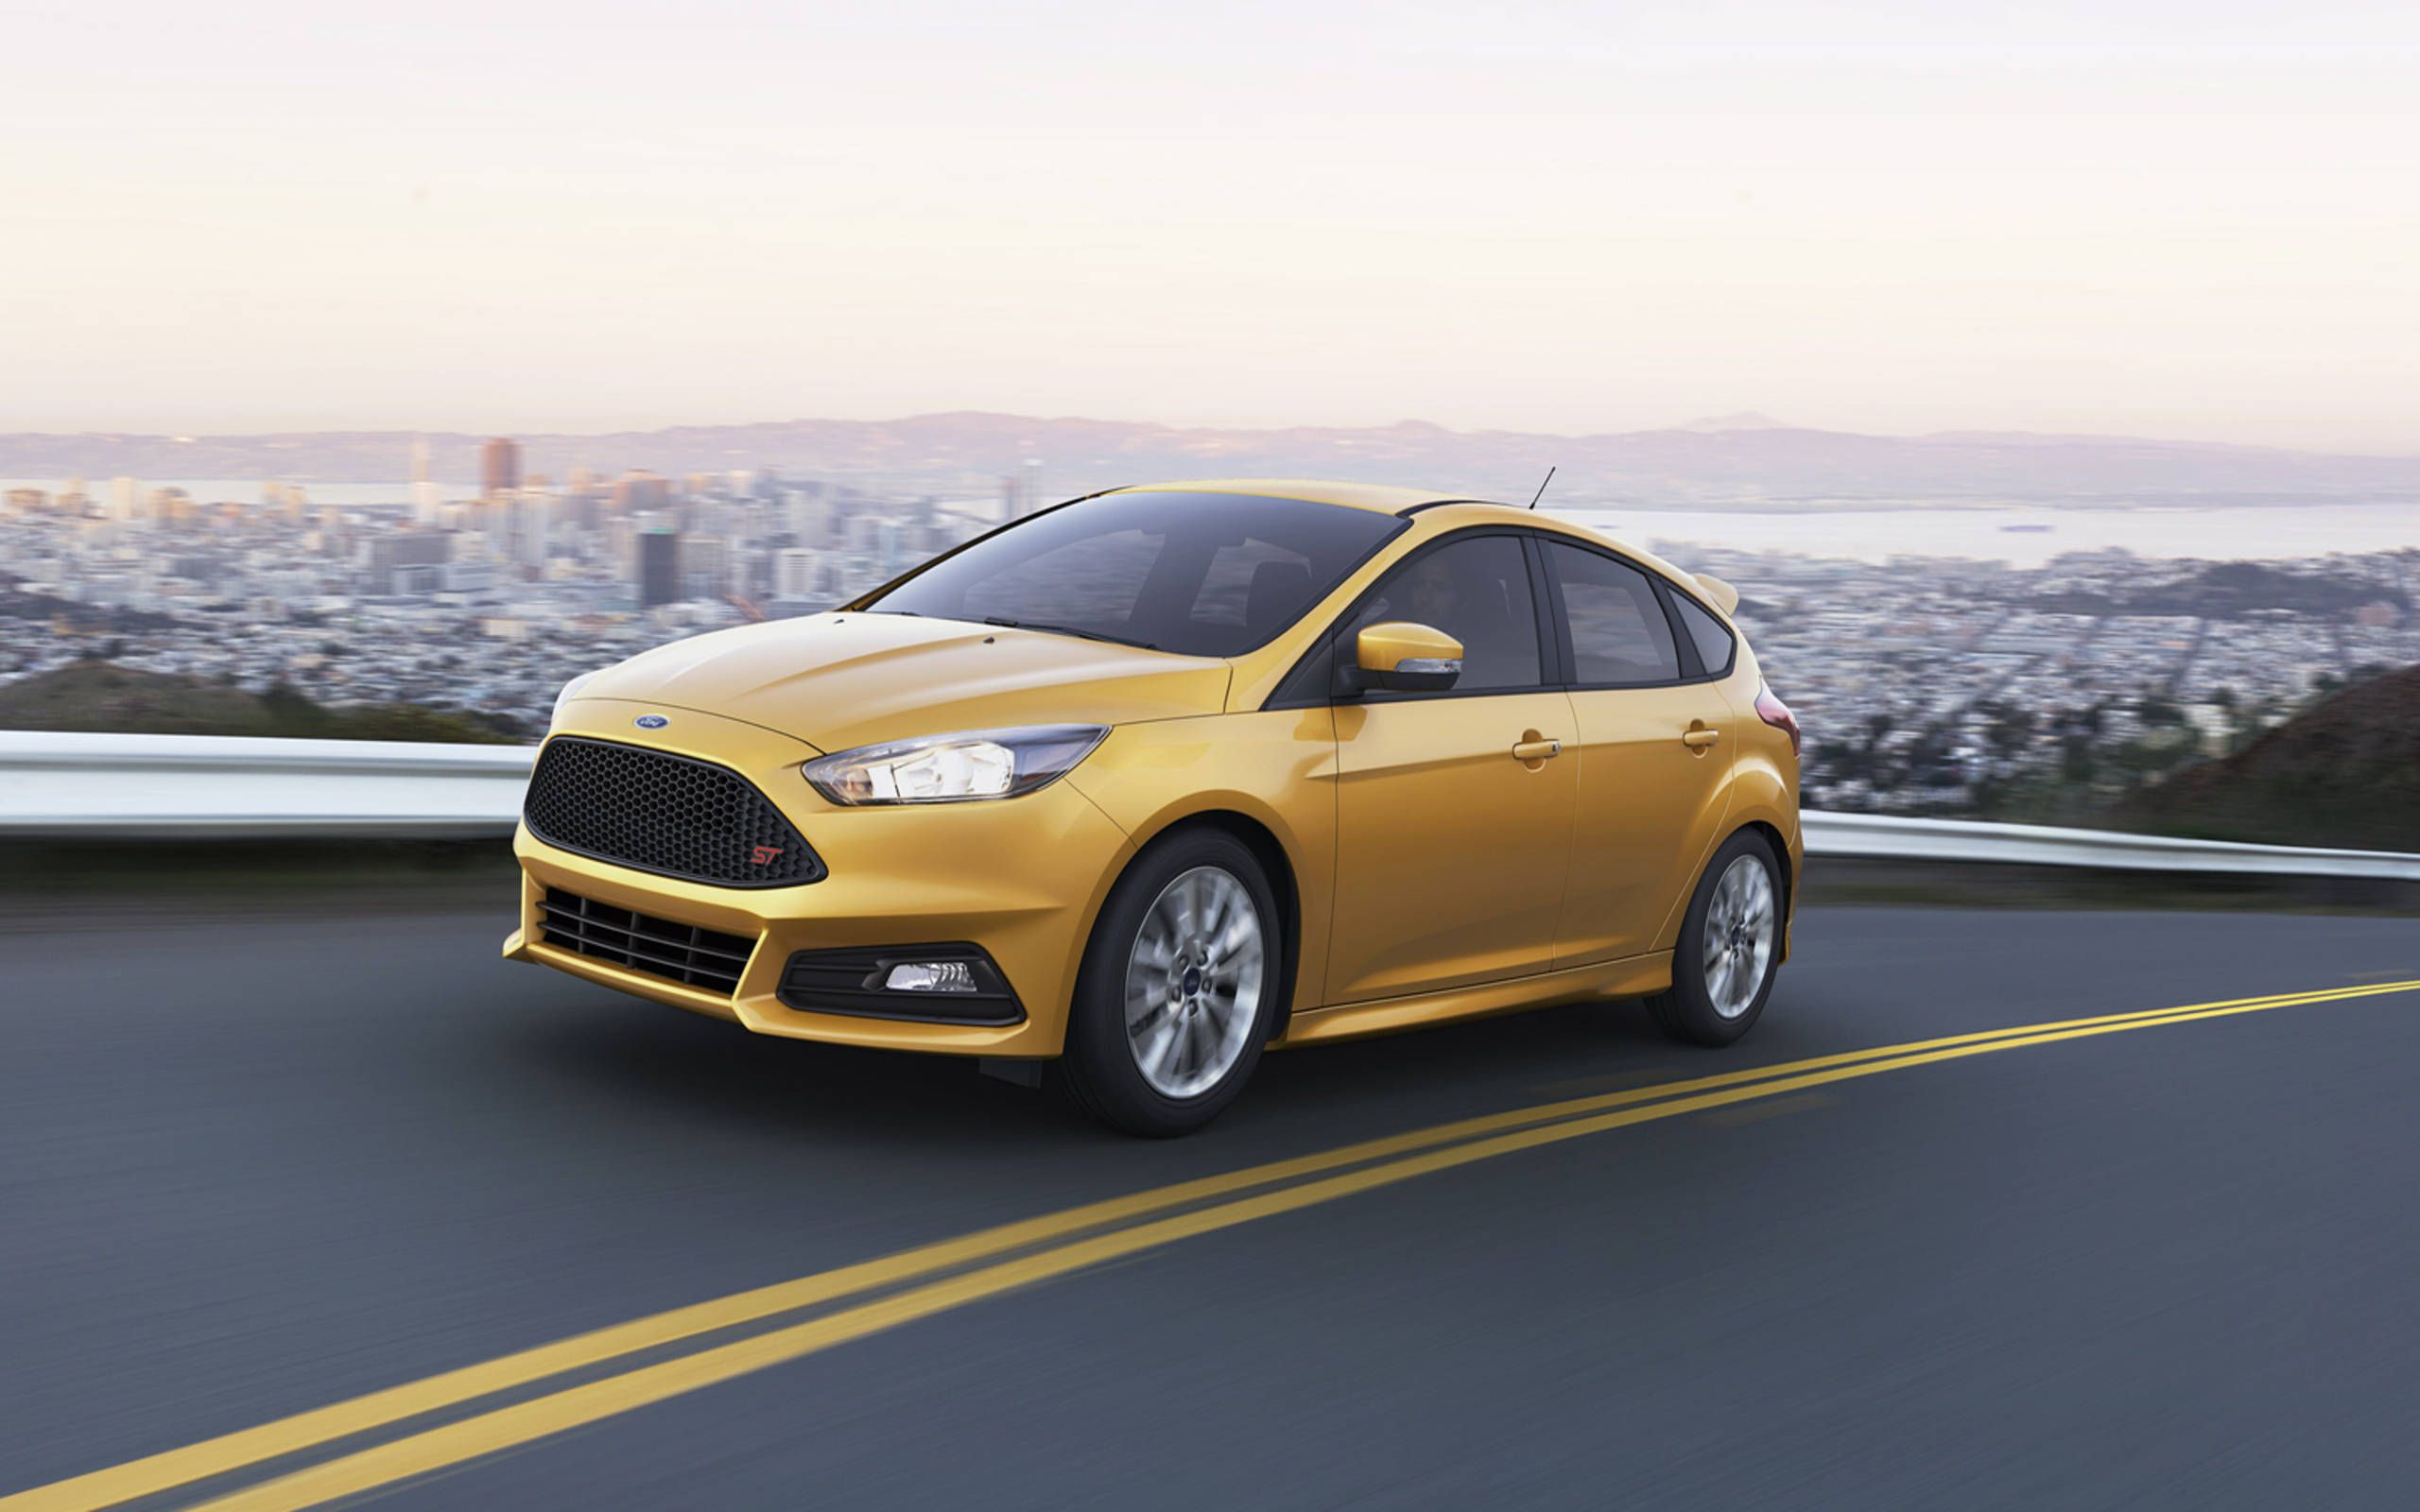 Ford Focus 2015  pictures information  specs